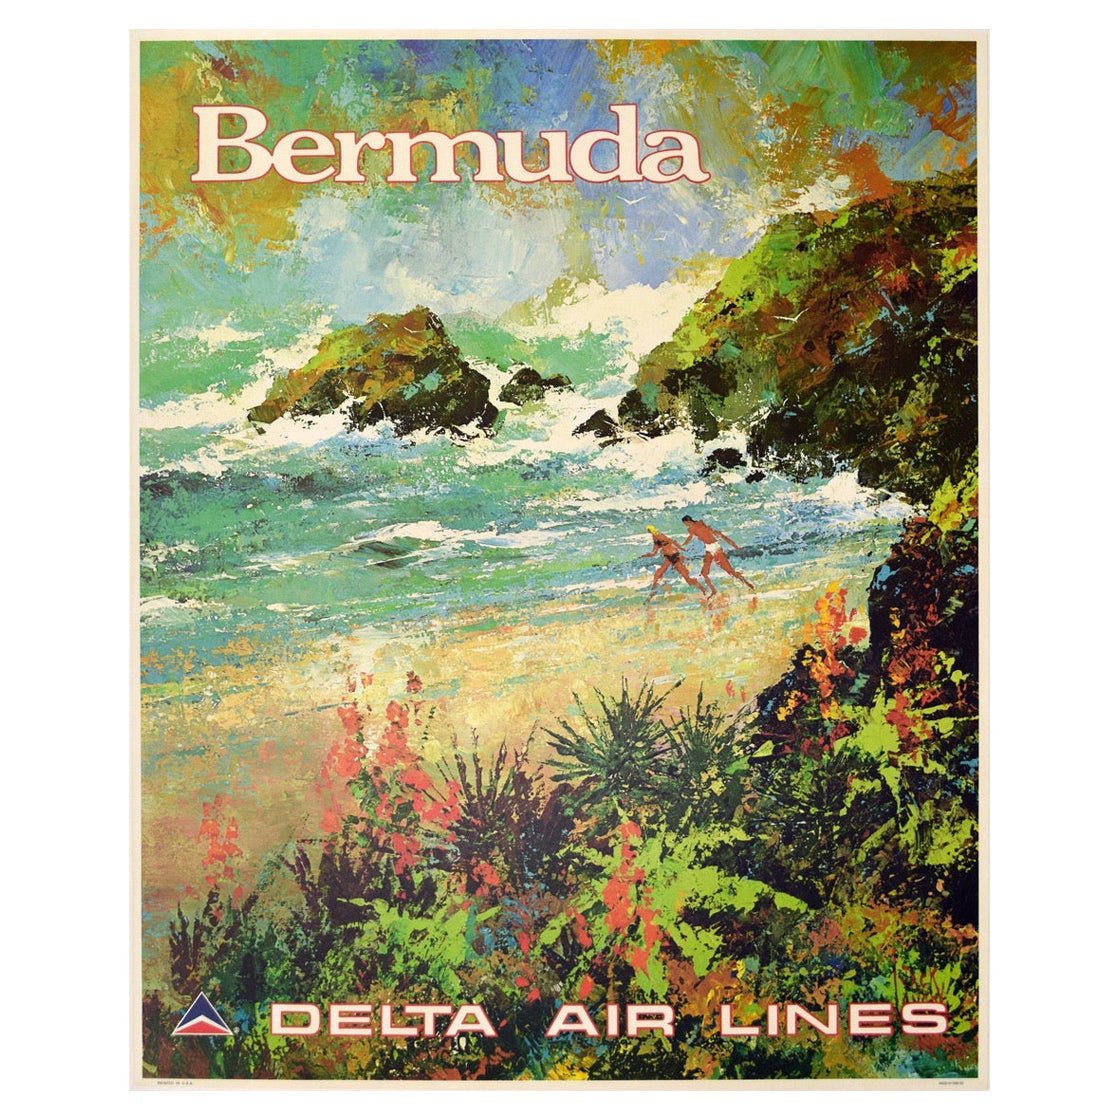 1970's Delta Airlines Bermuda Poster by Jack Laycox